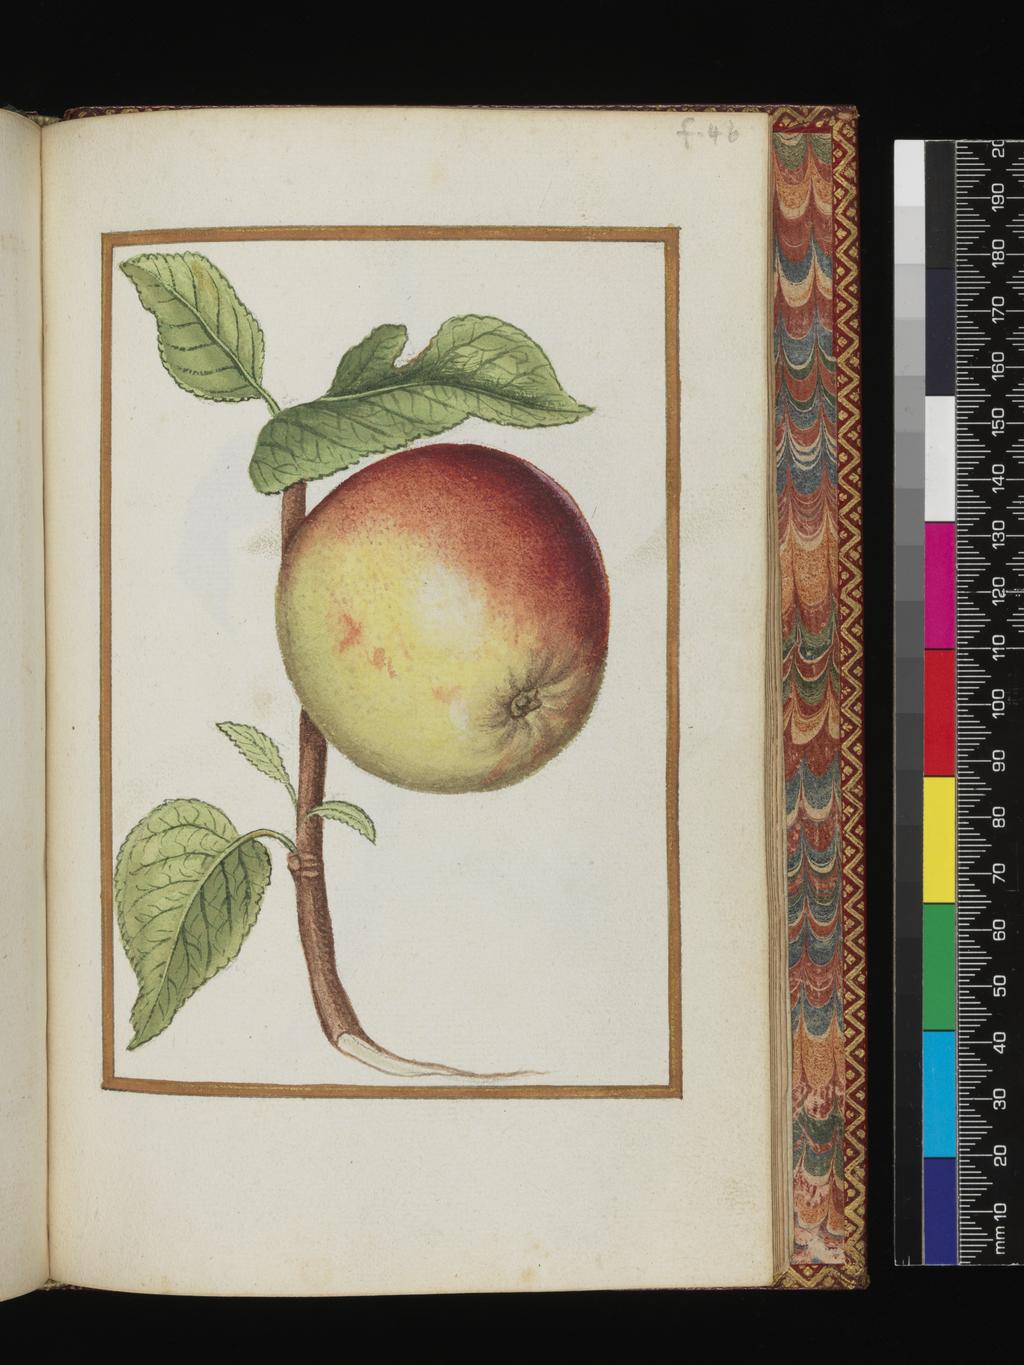 An image of Apple. Album containing a dedicatory sonnet and 48 drawings. Pinet, Antoine du (French, op. c. 1584). Each of the drawings is framed by a border of gold paint of varying size according to the depth of the painted area. The drawings on white laid paper, watermarked with a bunch of grapes are bound into an album with a contemporary gold-tooled limp vellum cover bearing the arms, recto and verso of Louise of Lorraine (1553-1601). This, in turn, is bound into an eighteenth century French red morocco gilt binding. The spine is lettered in gold (see 'inscriptions/marks'). Each of the drawings is framed by a border of gold paint of varying size according to the depth of the painted area. Blank ff not detailed elsewhere. Height, sheet size, 204 mm, width, sheet size, 139 mm.